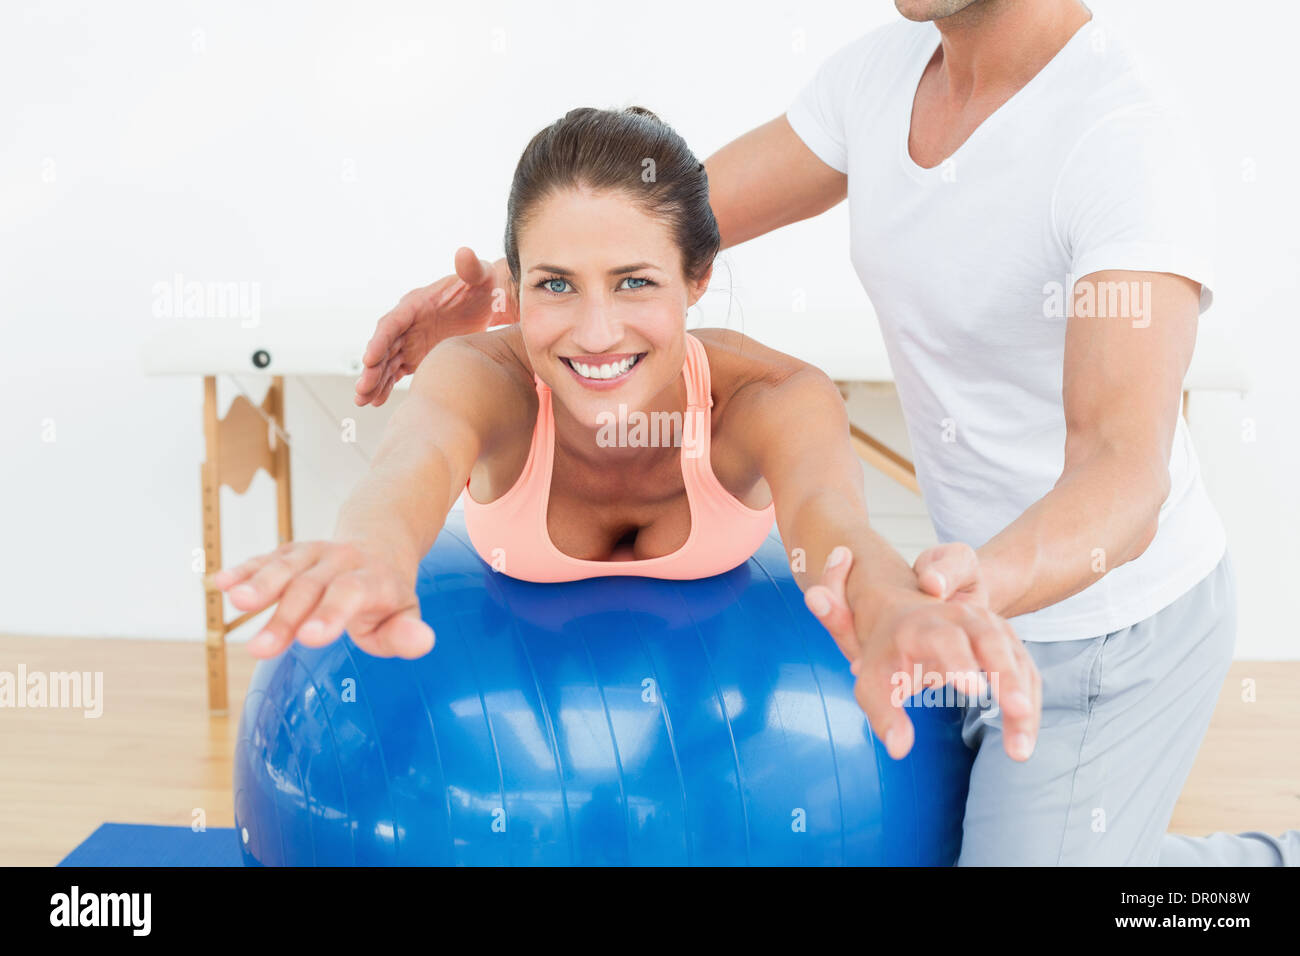 Physical therapist assisting woman with yoga ball Stock Photo